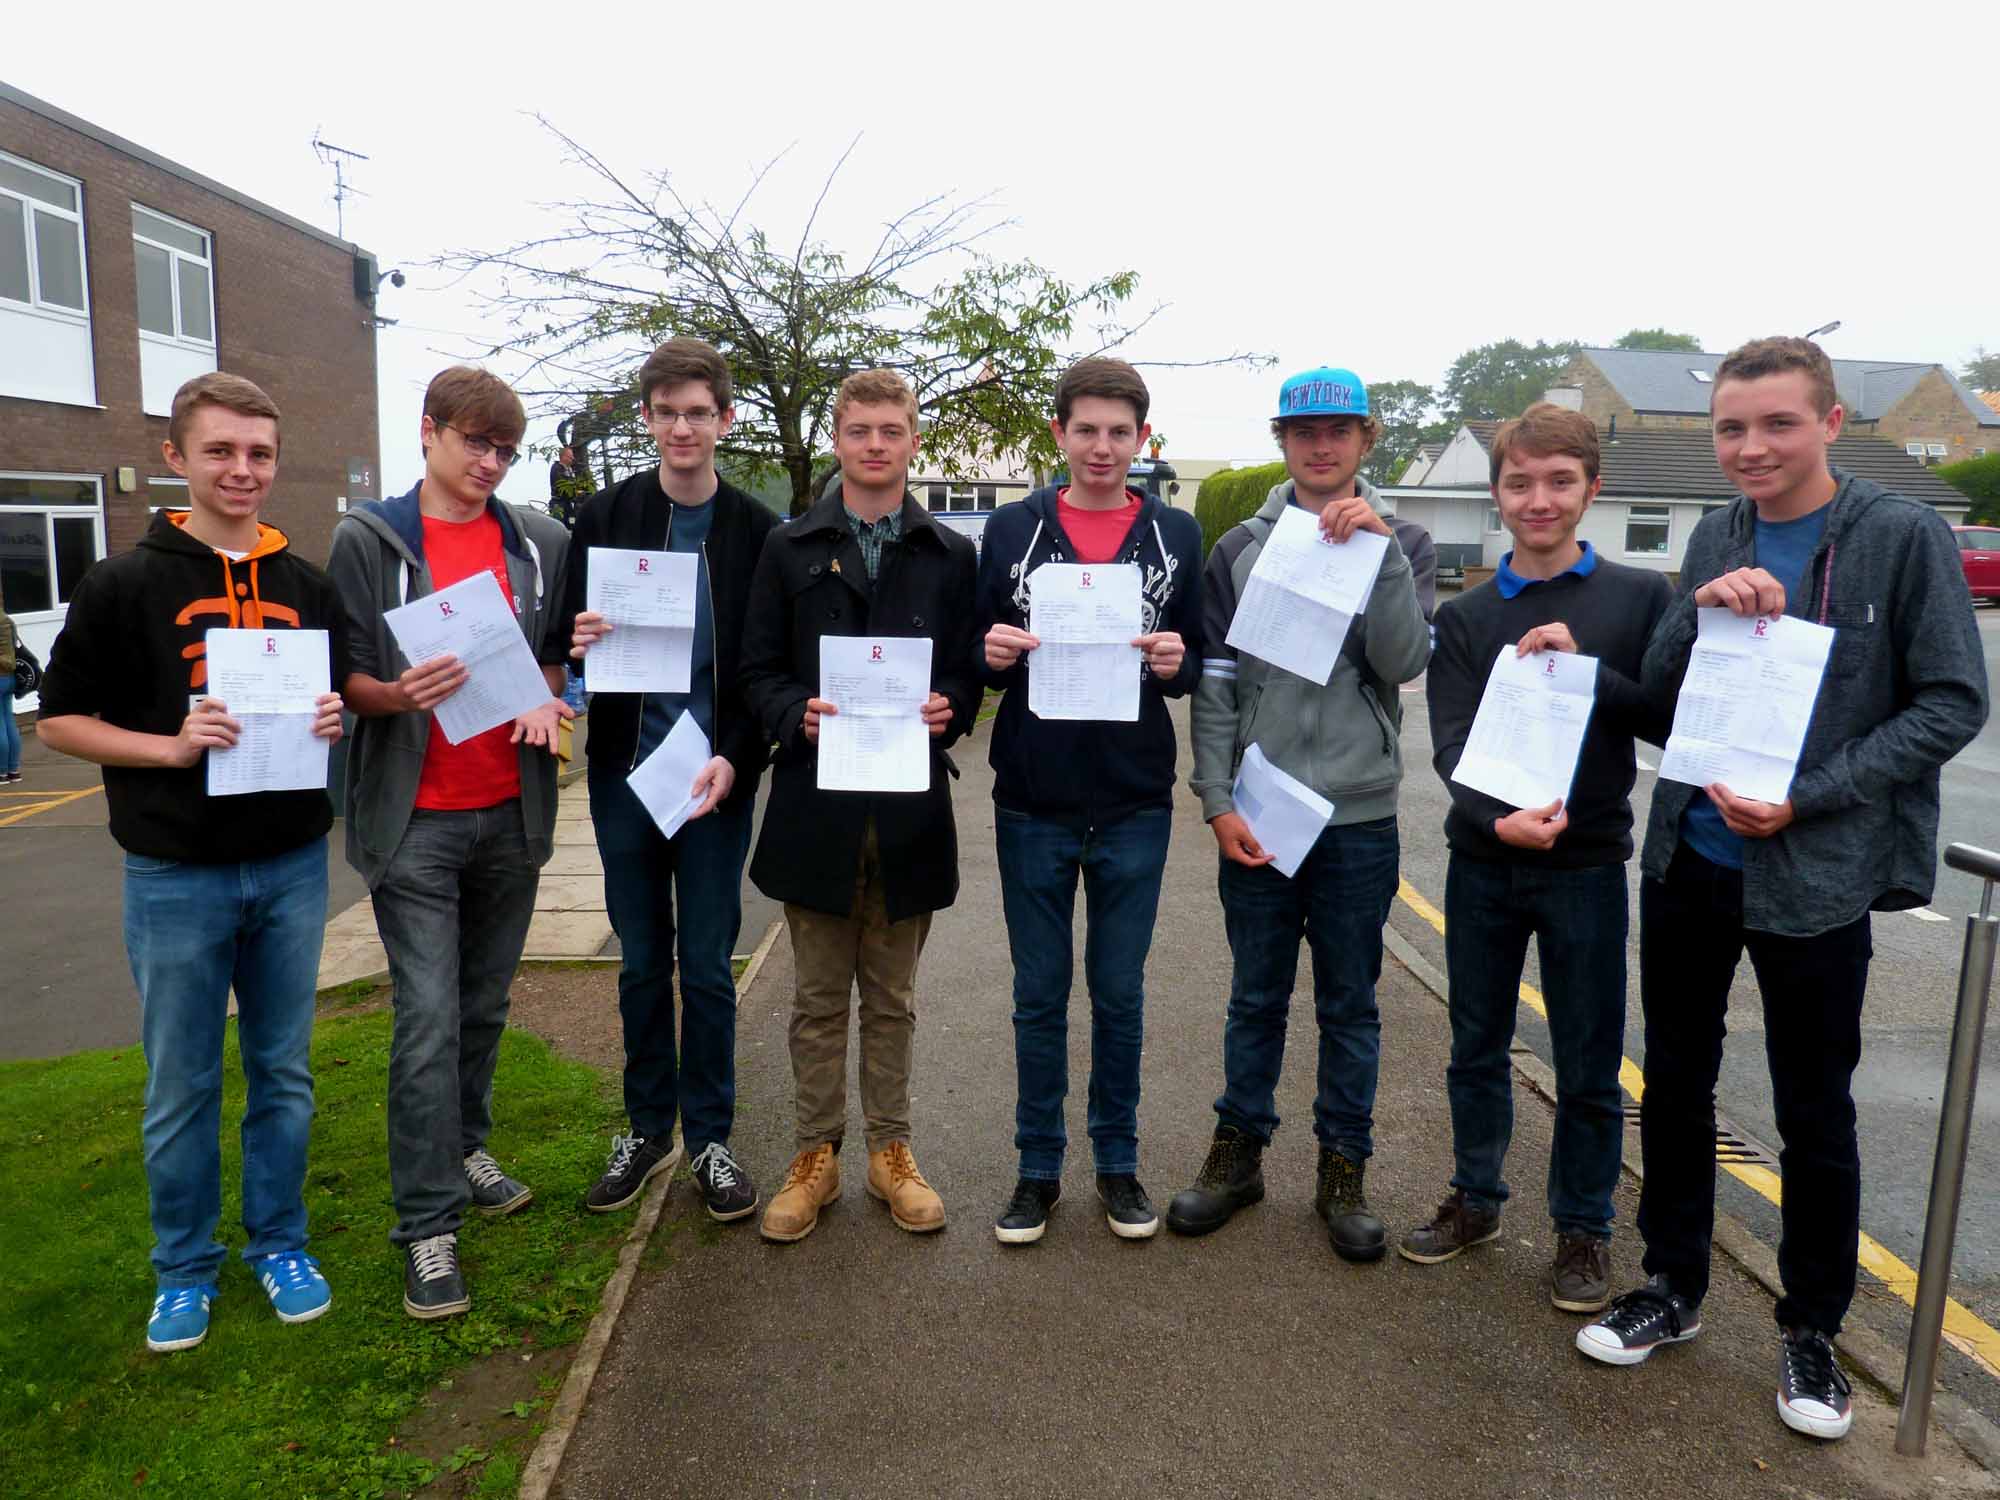 Matthew Petty, Huw Davis, Tom Hullah, Declan Taylor, Sam Corby, Finlay Taylor, Jamie Shakespeaare and Jamie Blundell celebrate getting their GCSE results at Rossett School